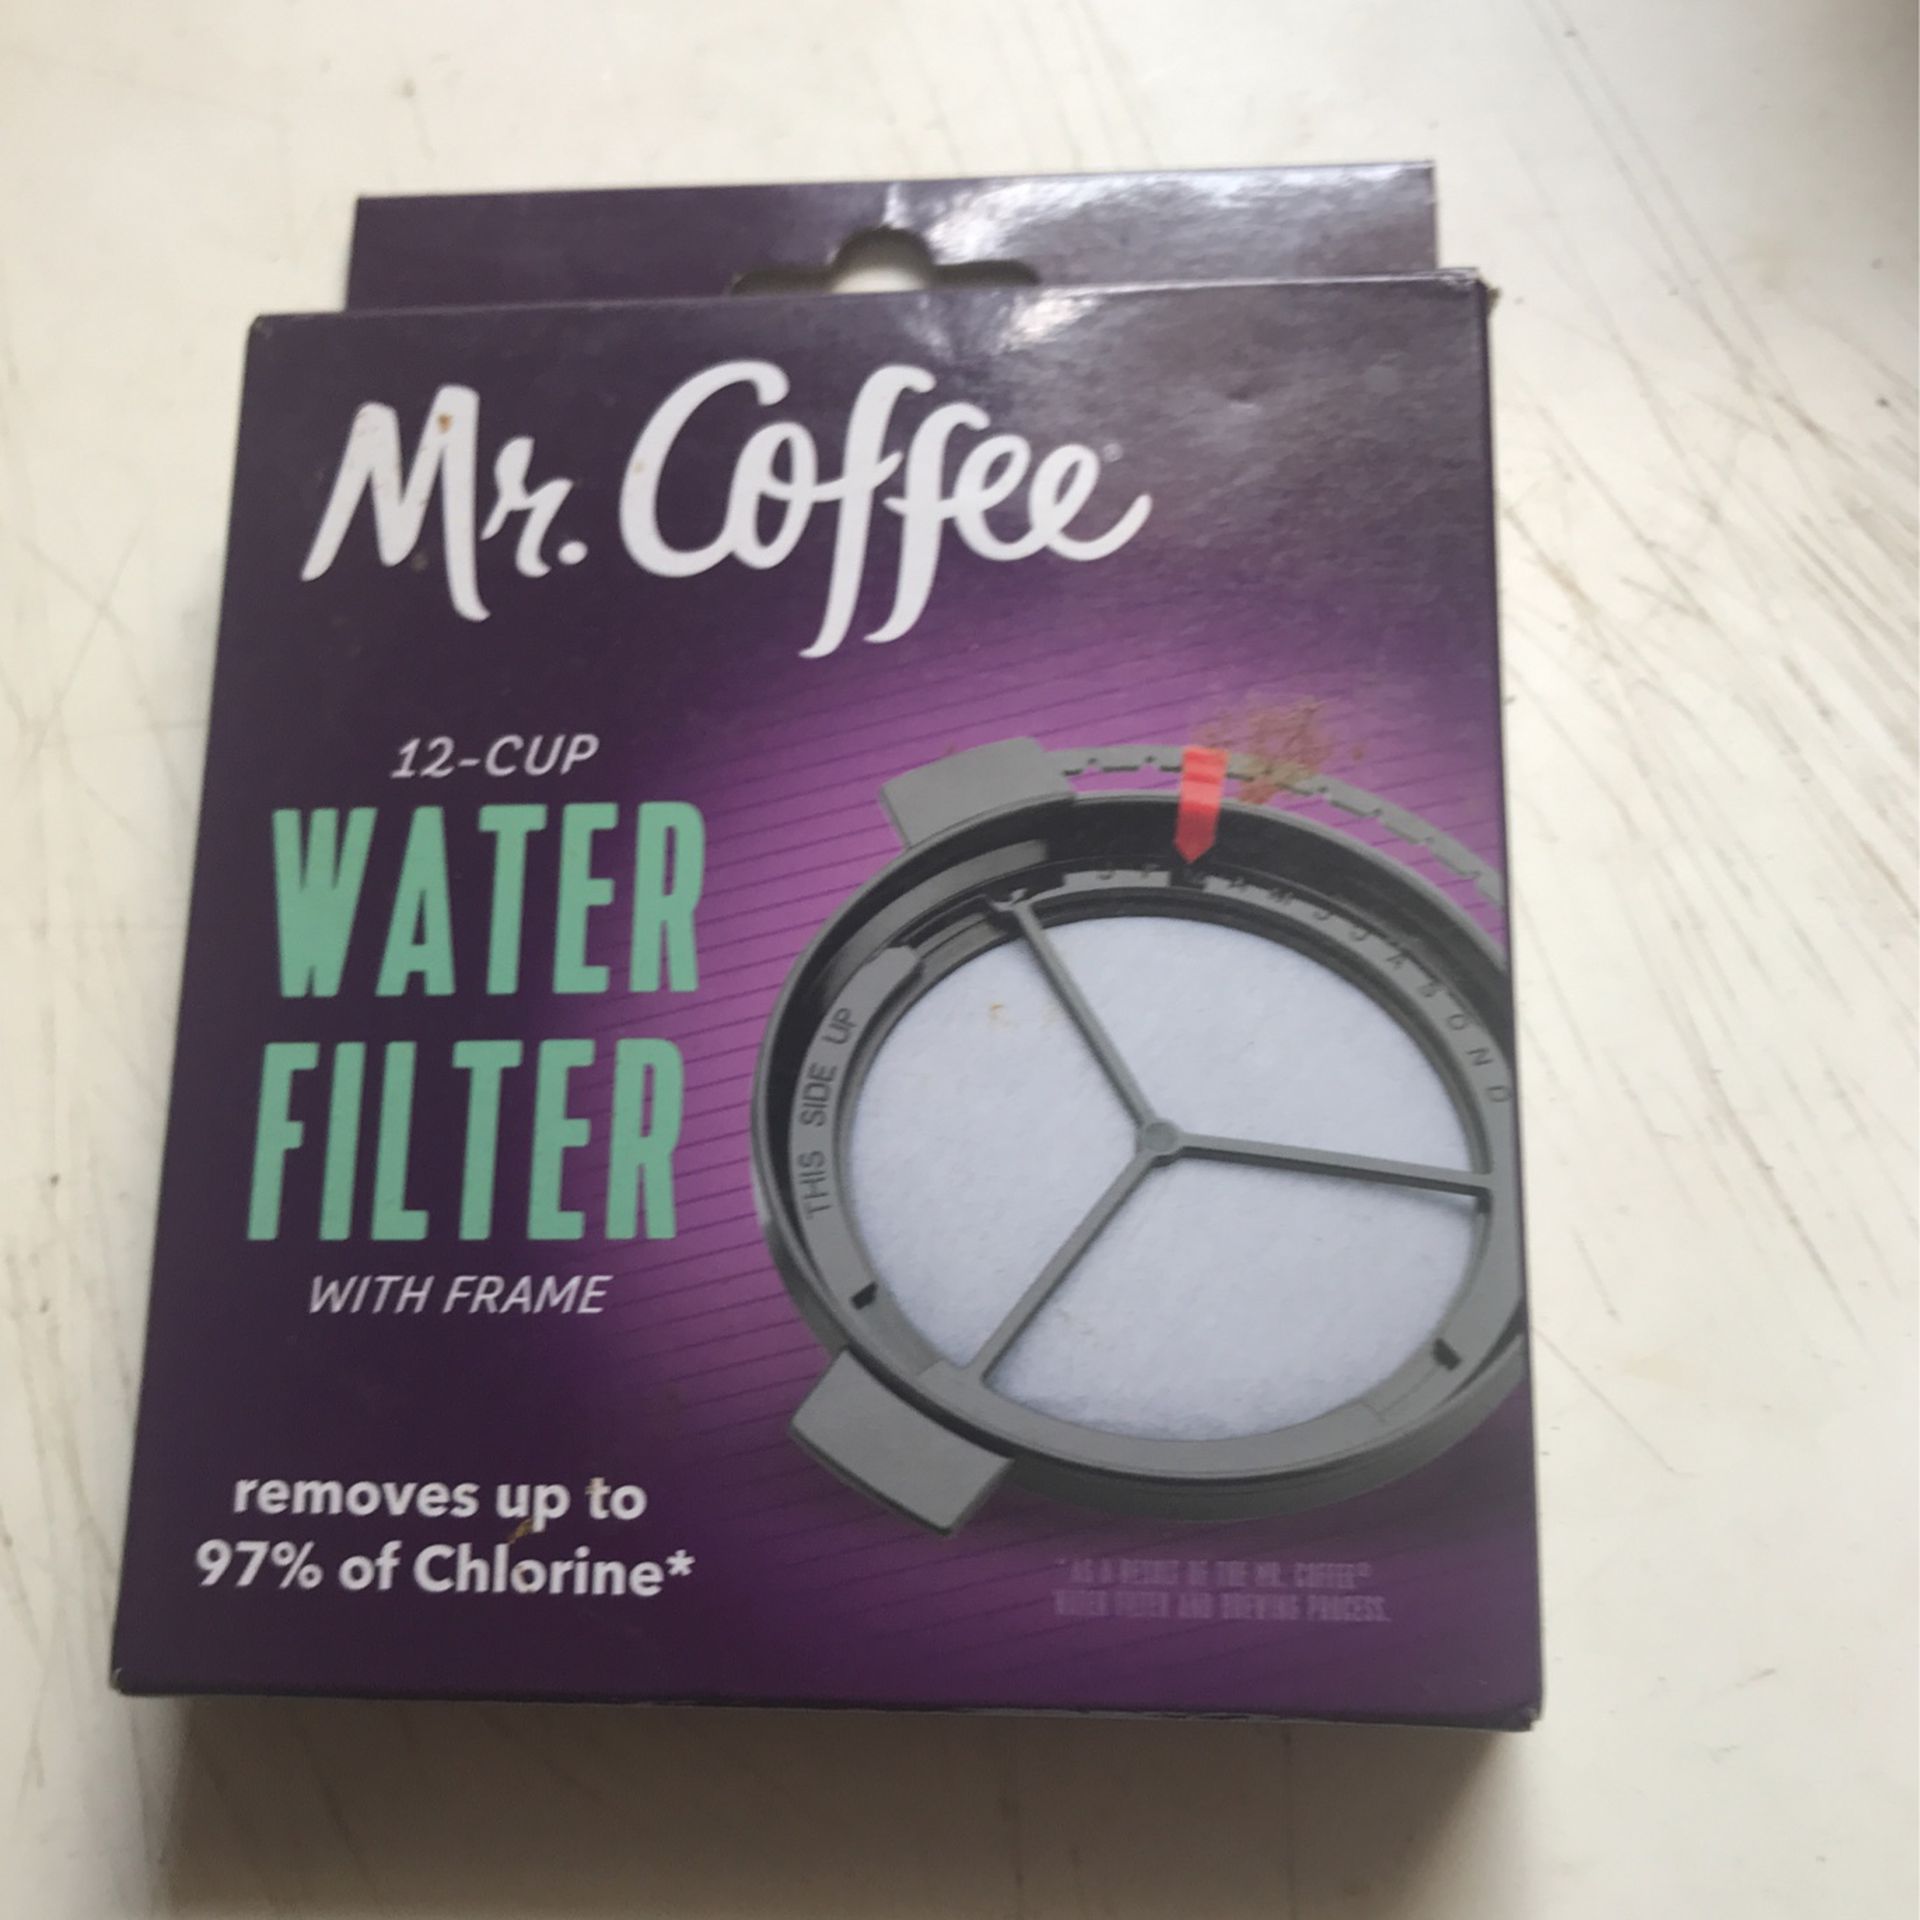 Water Filter for Mr. Coffee drip ☕️ maker